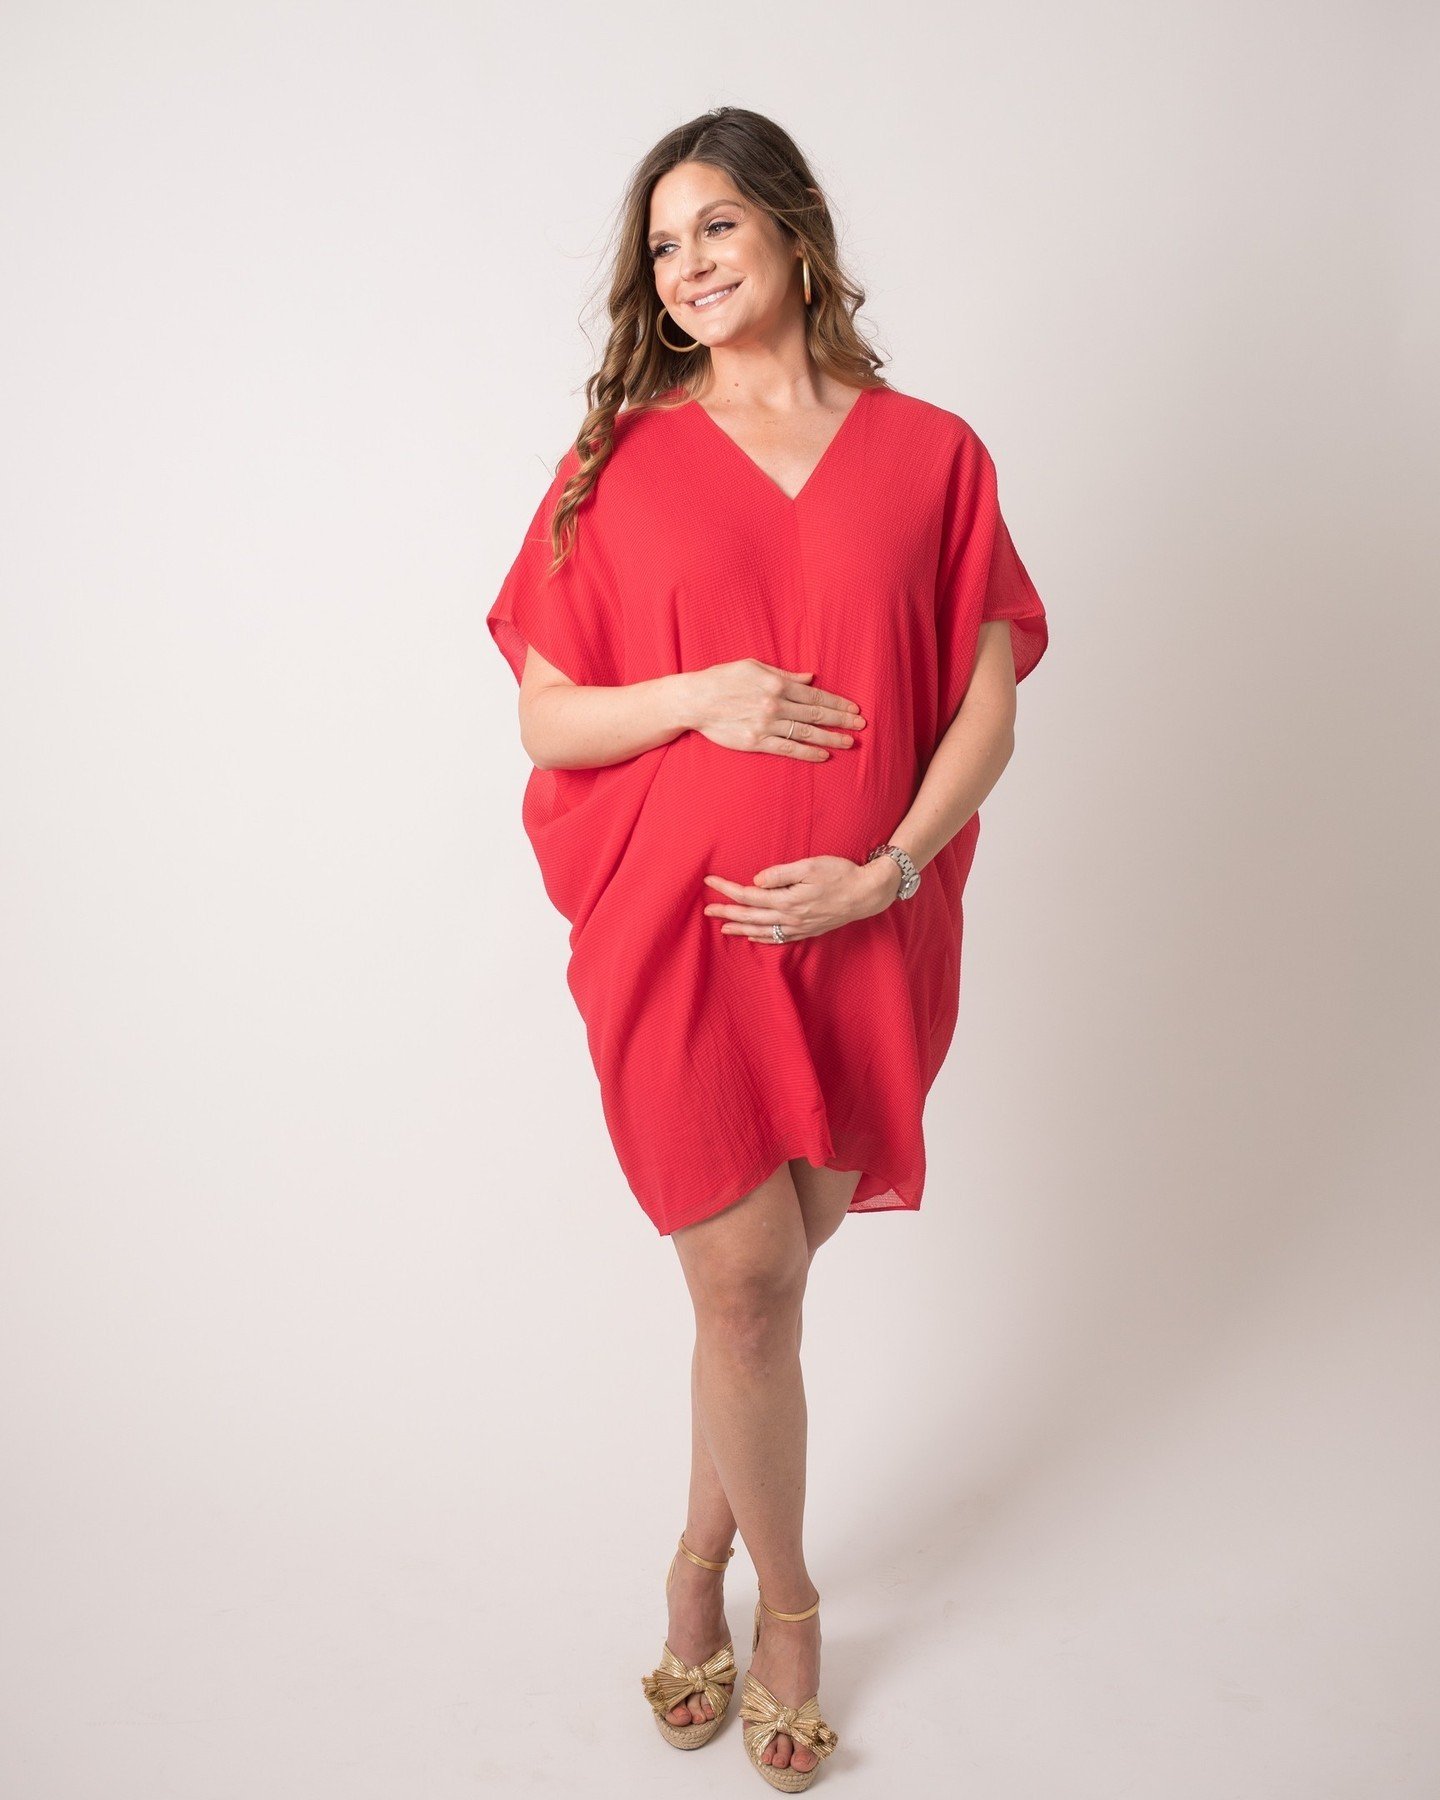 F U N! ⁠
We love the pop of color and choice of dress mom to be chose to wear for her maternity photoshoot!⁠
⁠
Now booking end of April &amp; May photoshoots
🖤🖤🖤🖤🖤🖤🖤🖤🖤🖤🖤🖤🖤🖤🖤

Book ahead 1 - 2 months for the best experience 🖤

Schedule